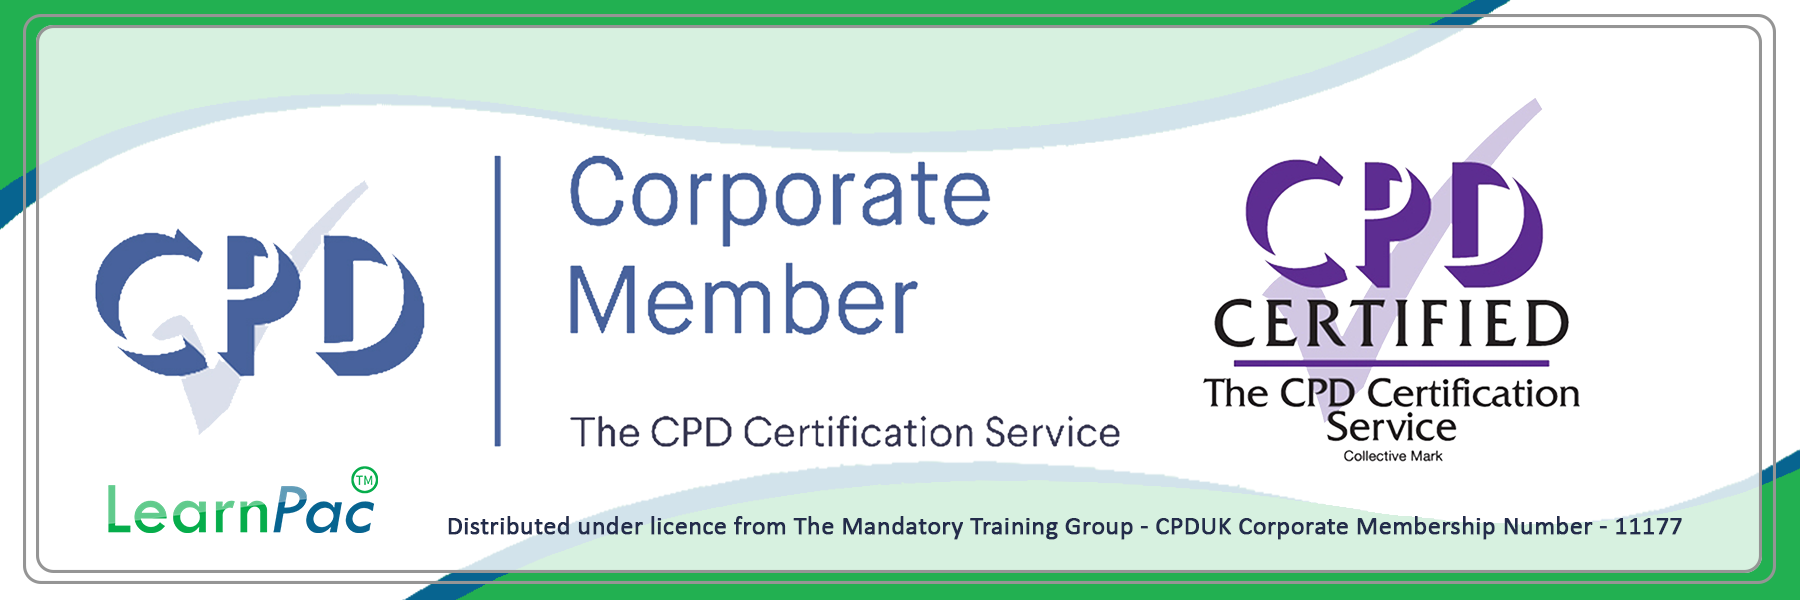 Medicines Management - E-Learning Courses with Certificates - CPD Certified - LearnPac Systems UK -